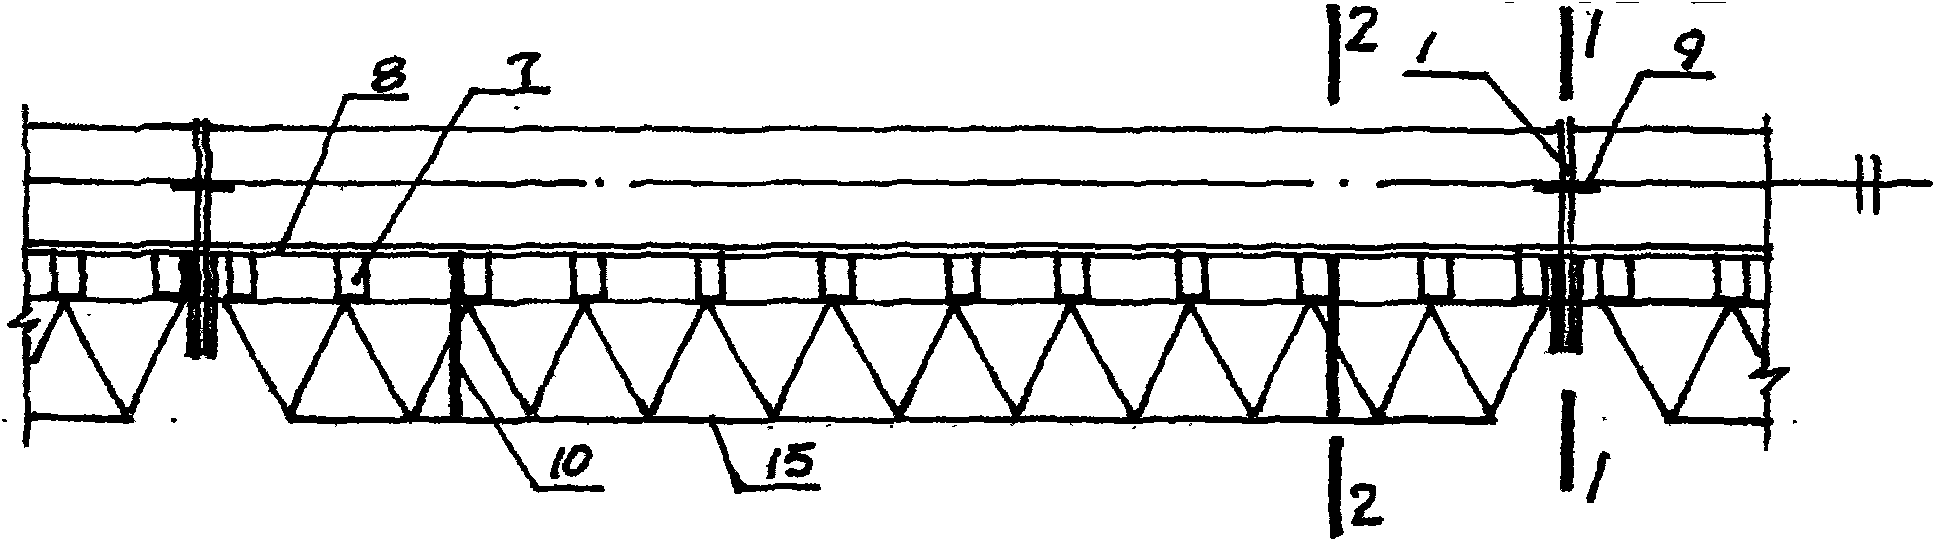 Attached truss type concrete wall form support